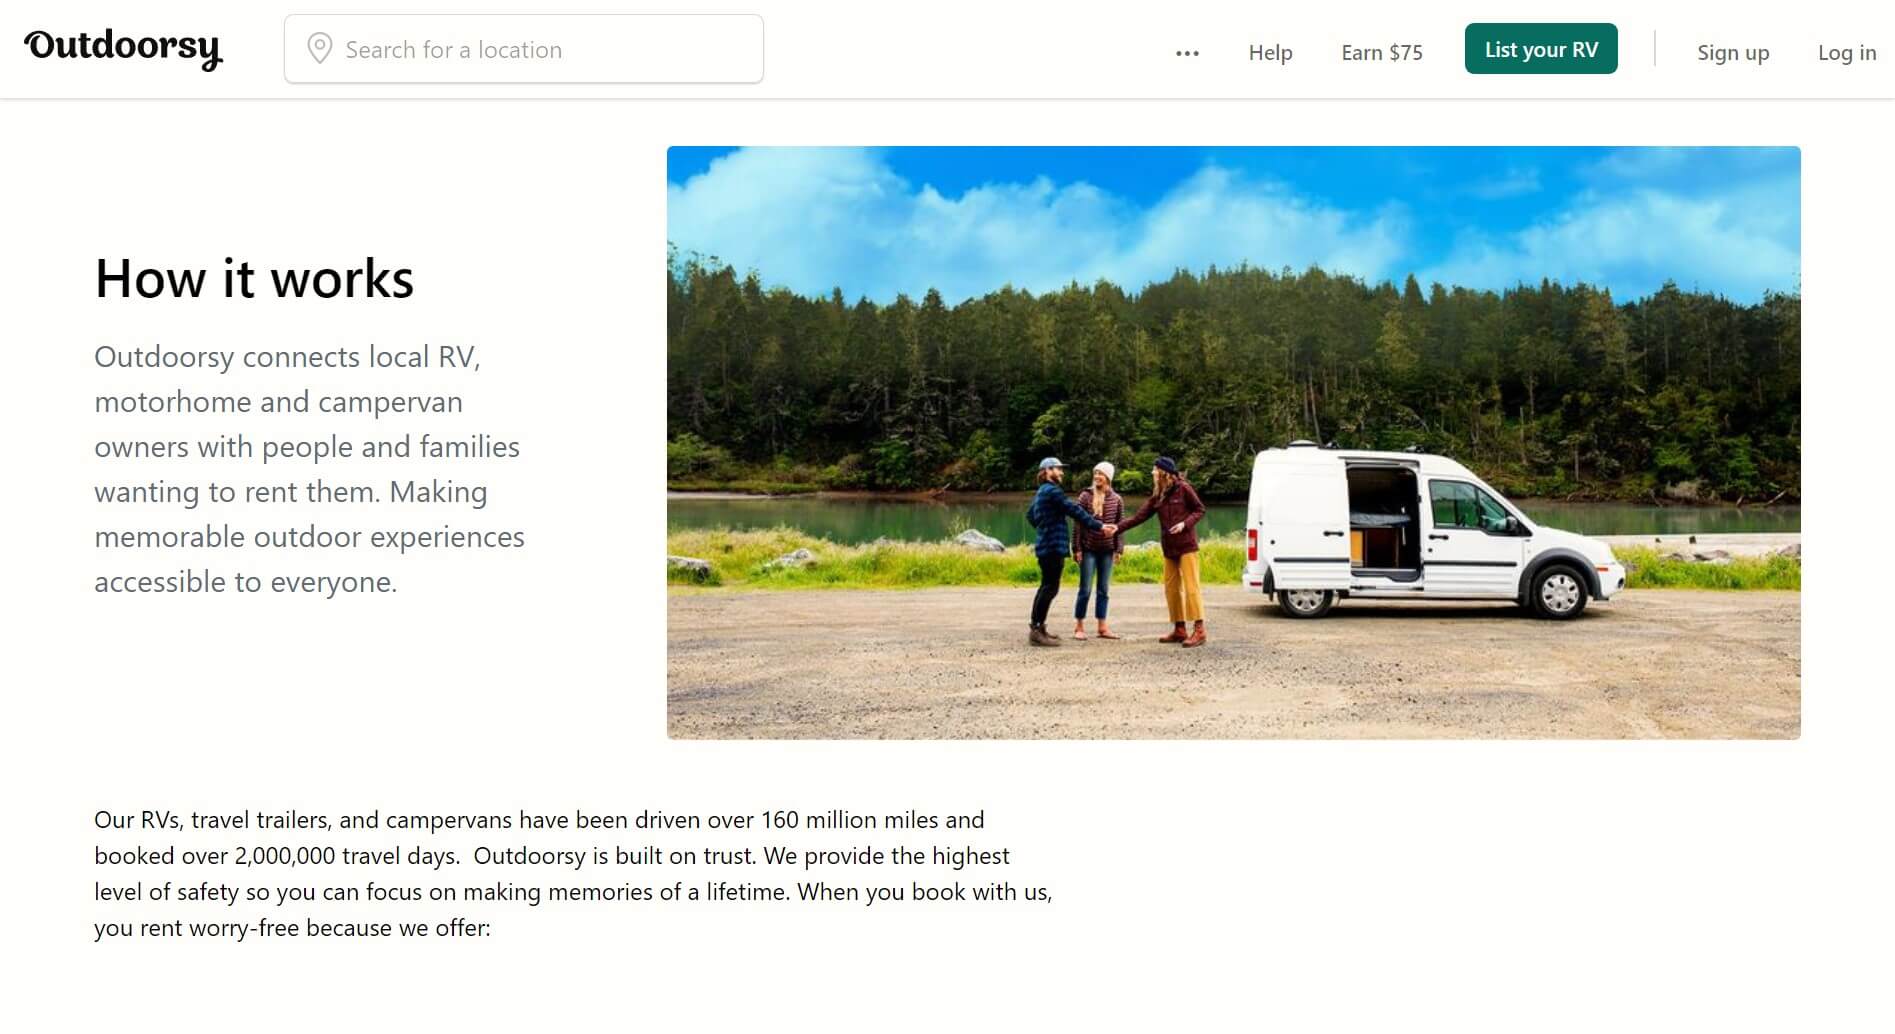 About page of Outdoorsy - where to rent an RV on a first time